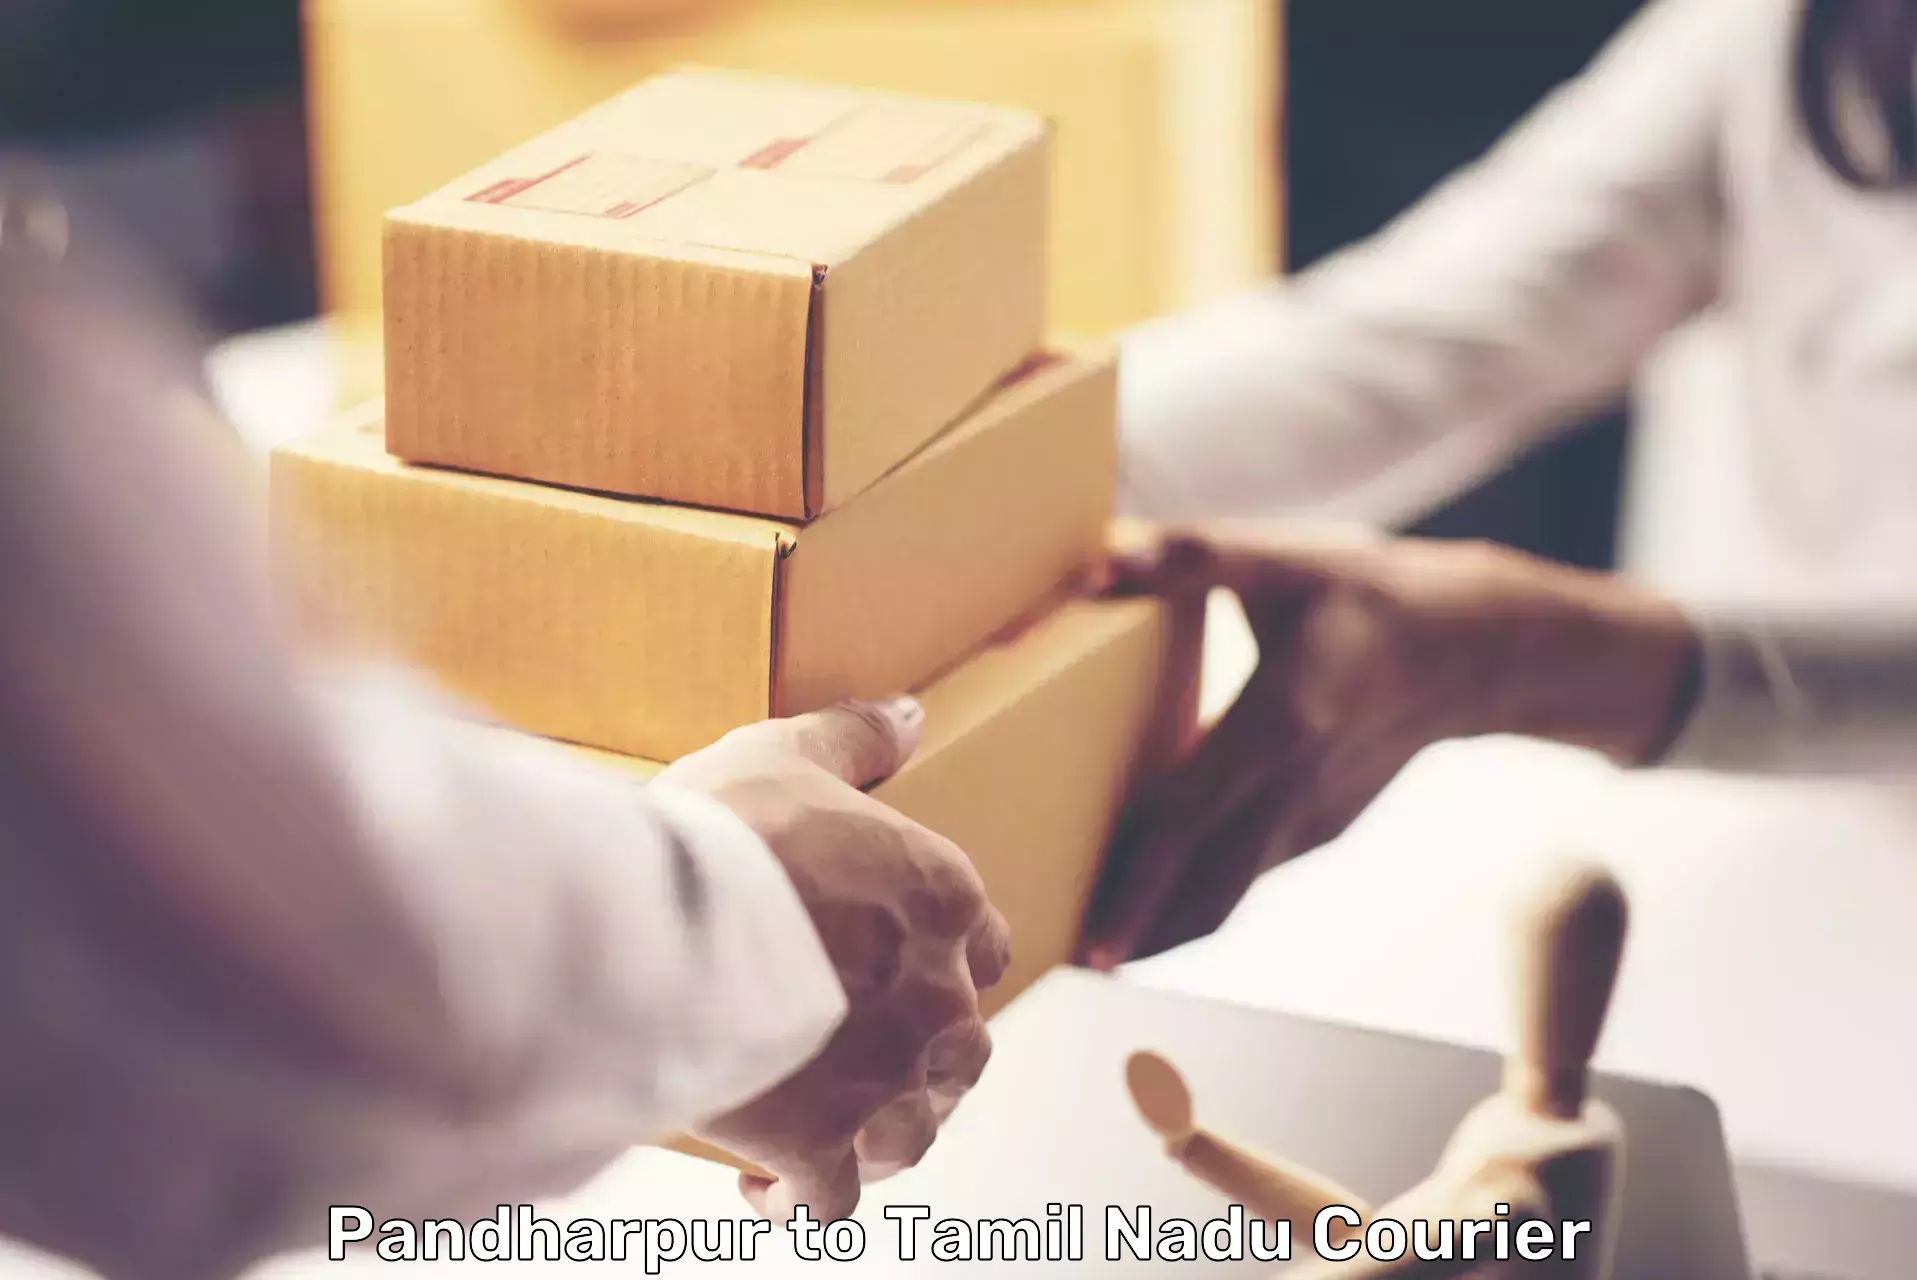 State-of-the-art courier technology Pandharpur to Anthiyur